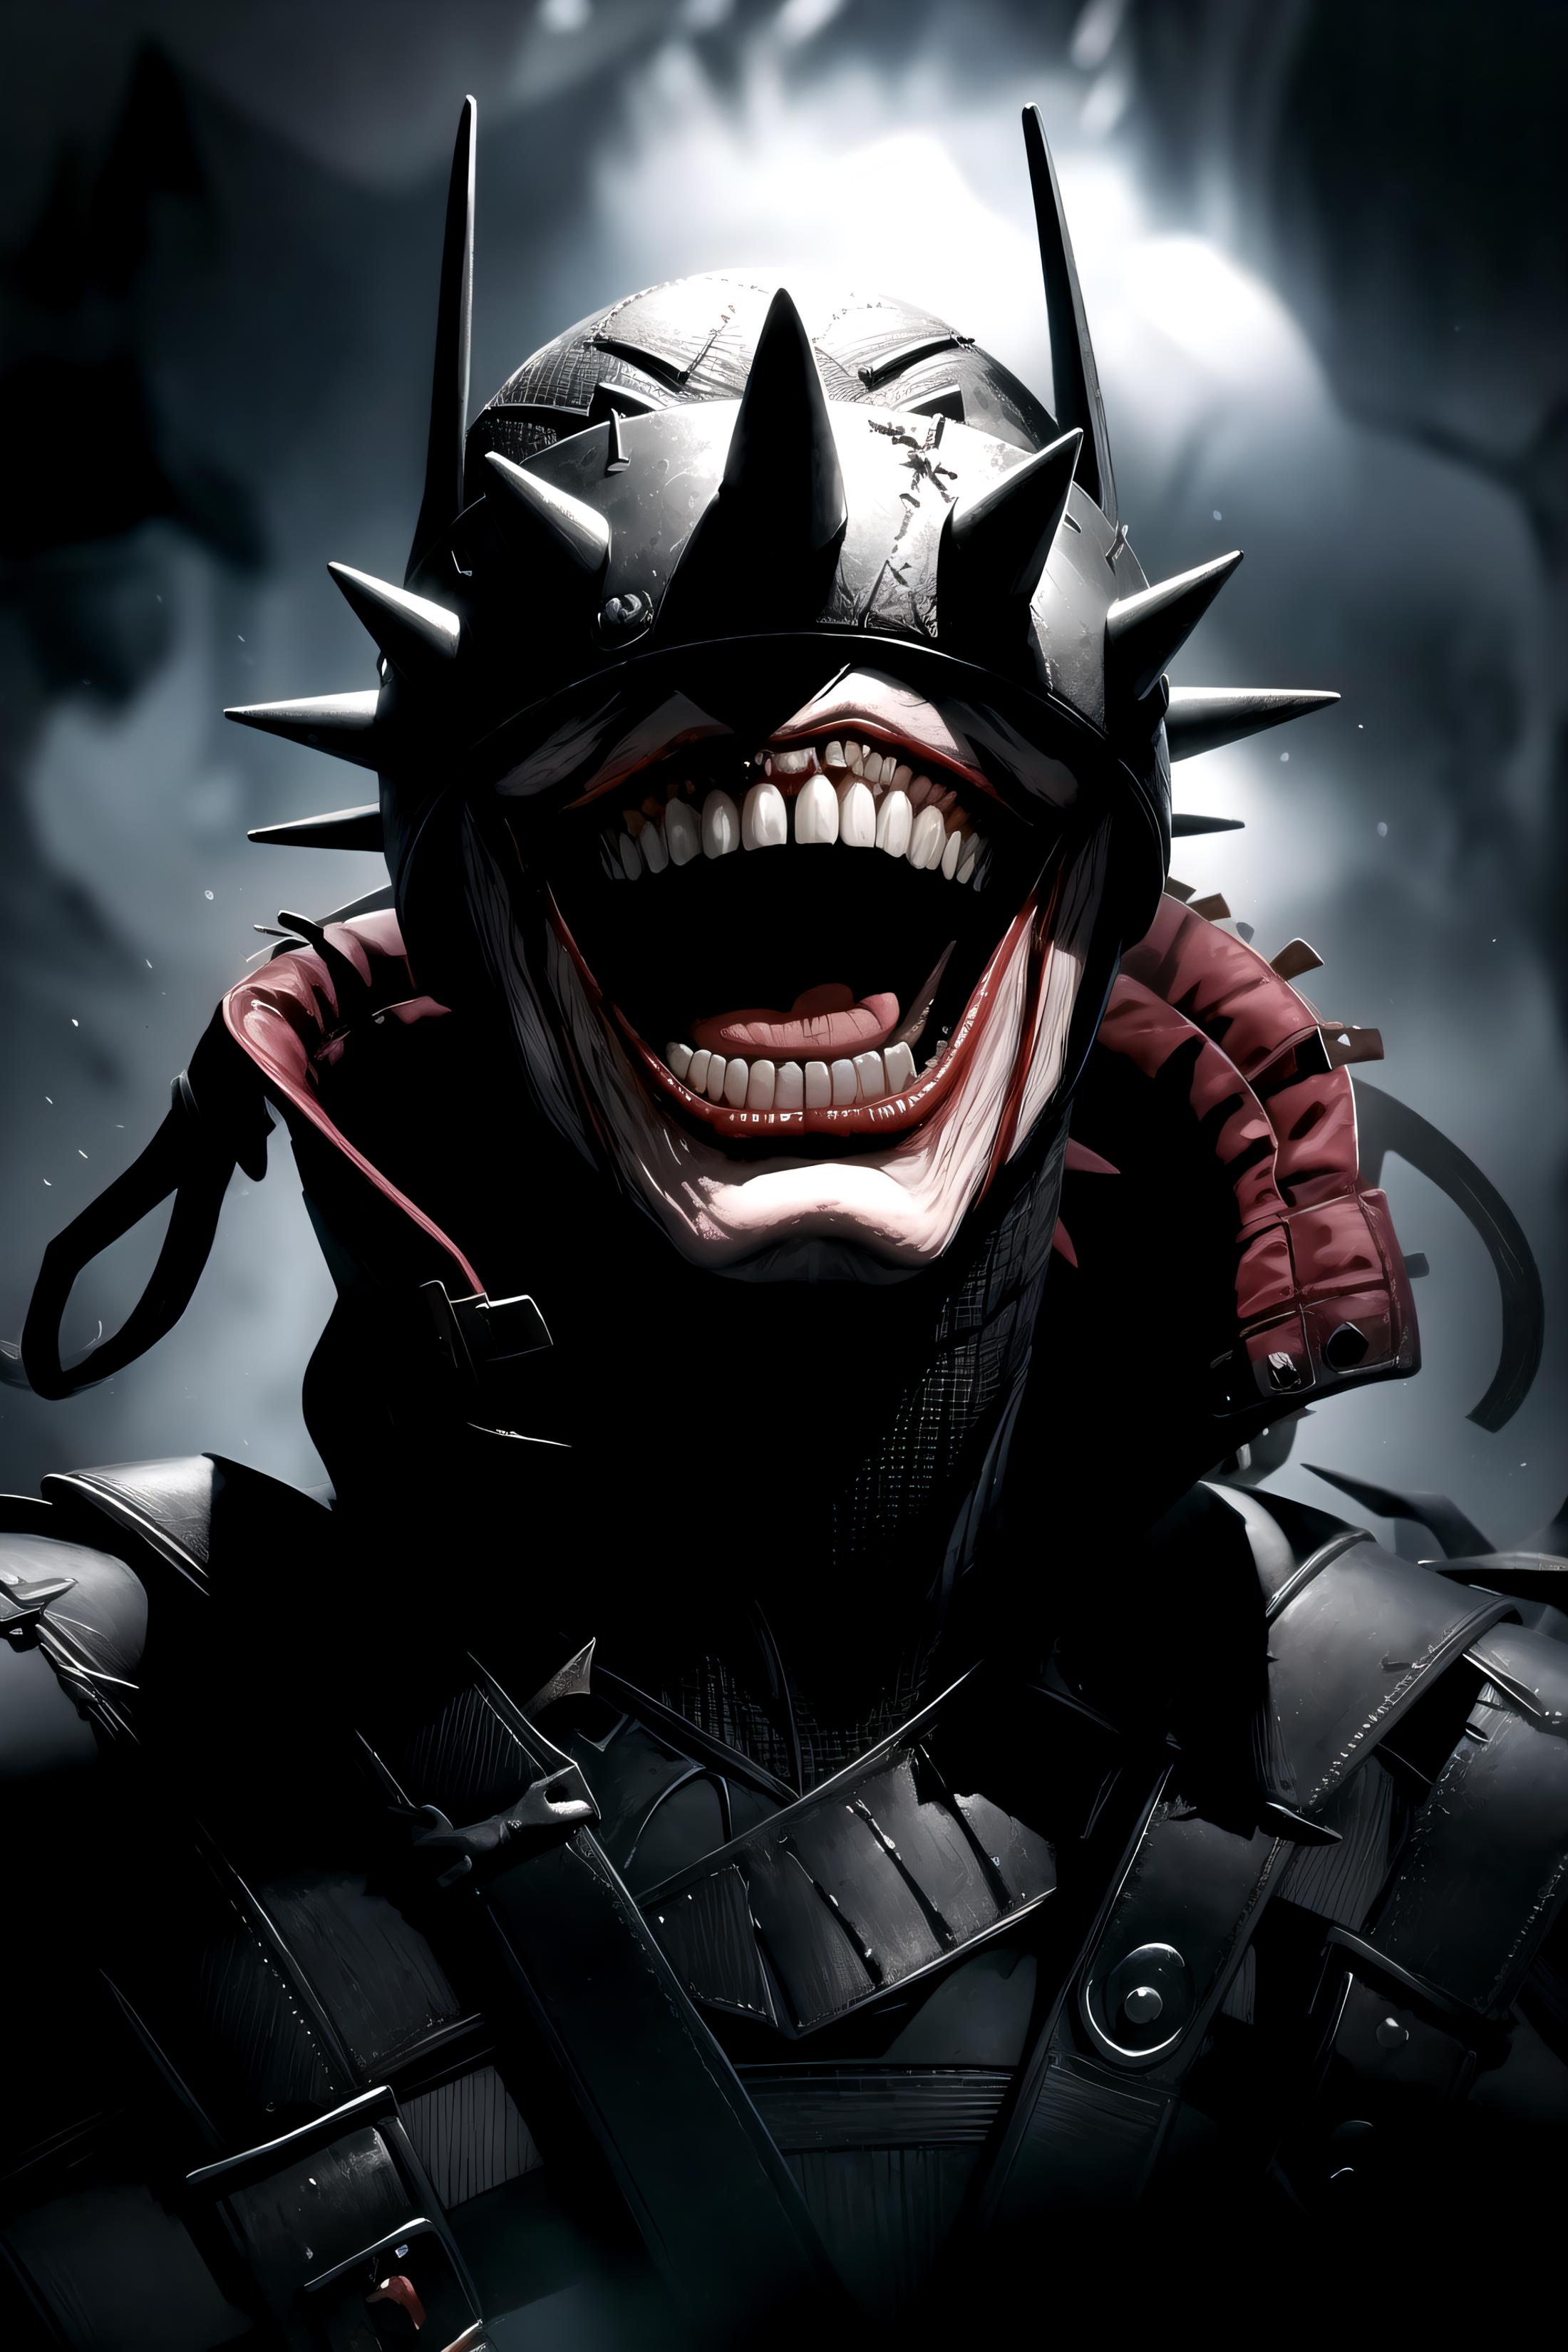 A dark and menacing image of a character with a Joker-like smile and pointy teeth.